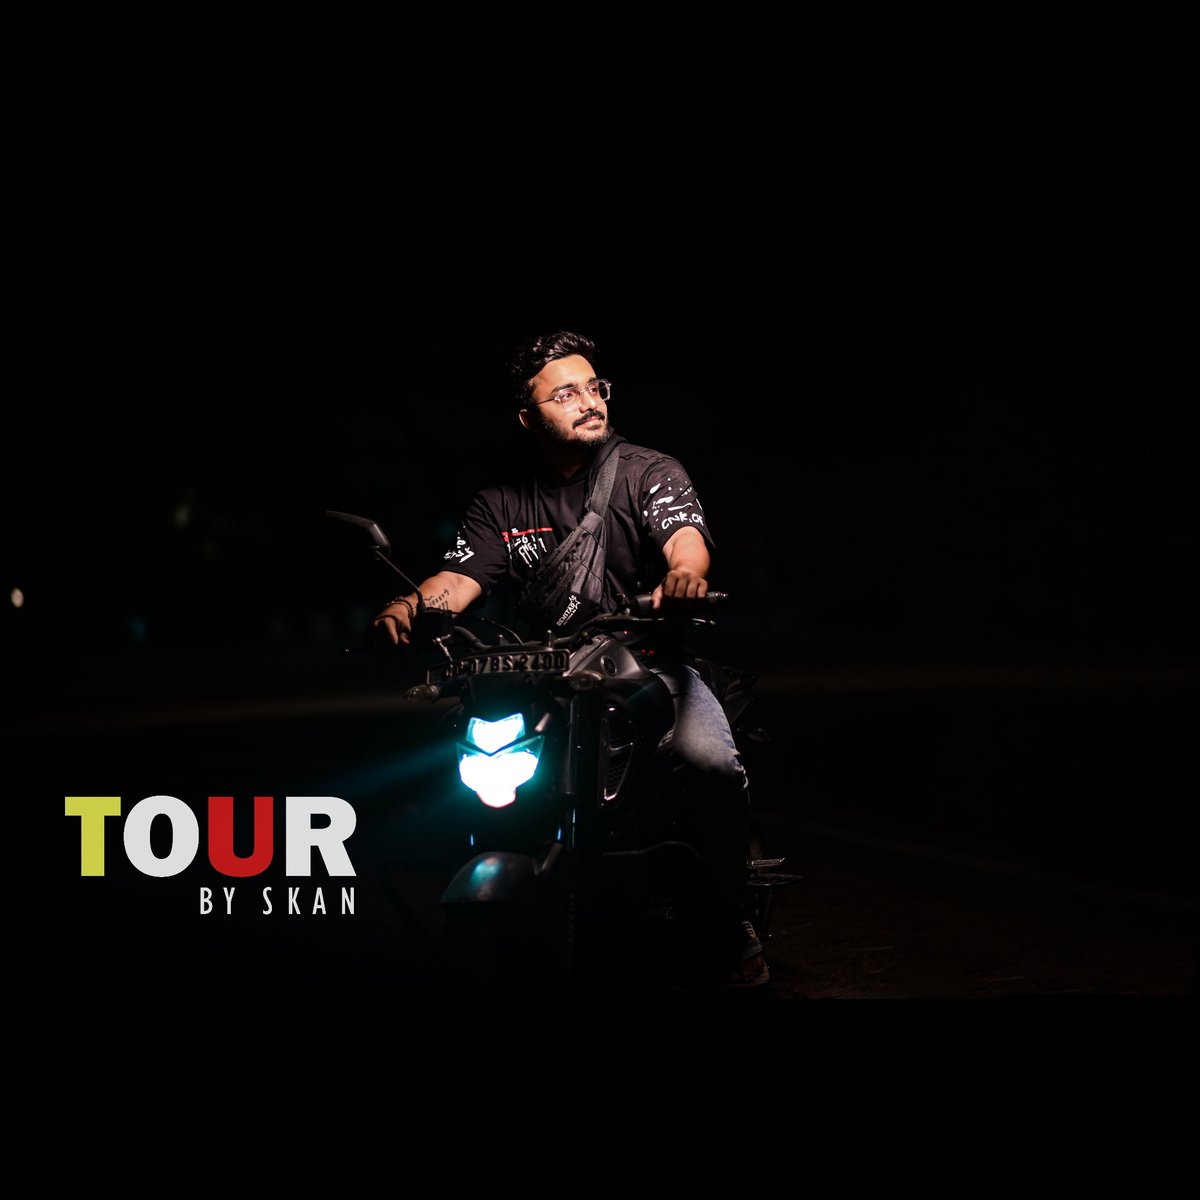 Until you step into the unknown, you don't know what you're made of, so let the adventure begin and go on a *TOUR*

TOUR EP

Dropping tracklist on 22nd June 

#ep #music #rap #skan_official #hindirap